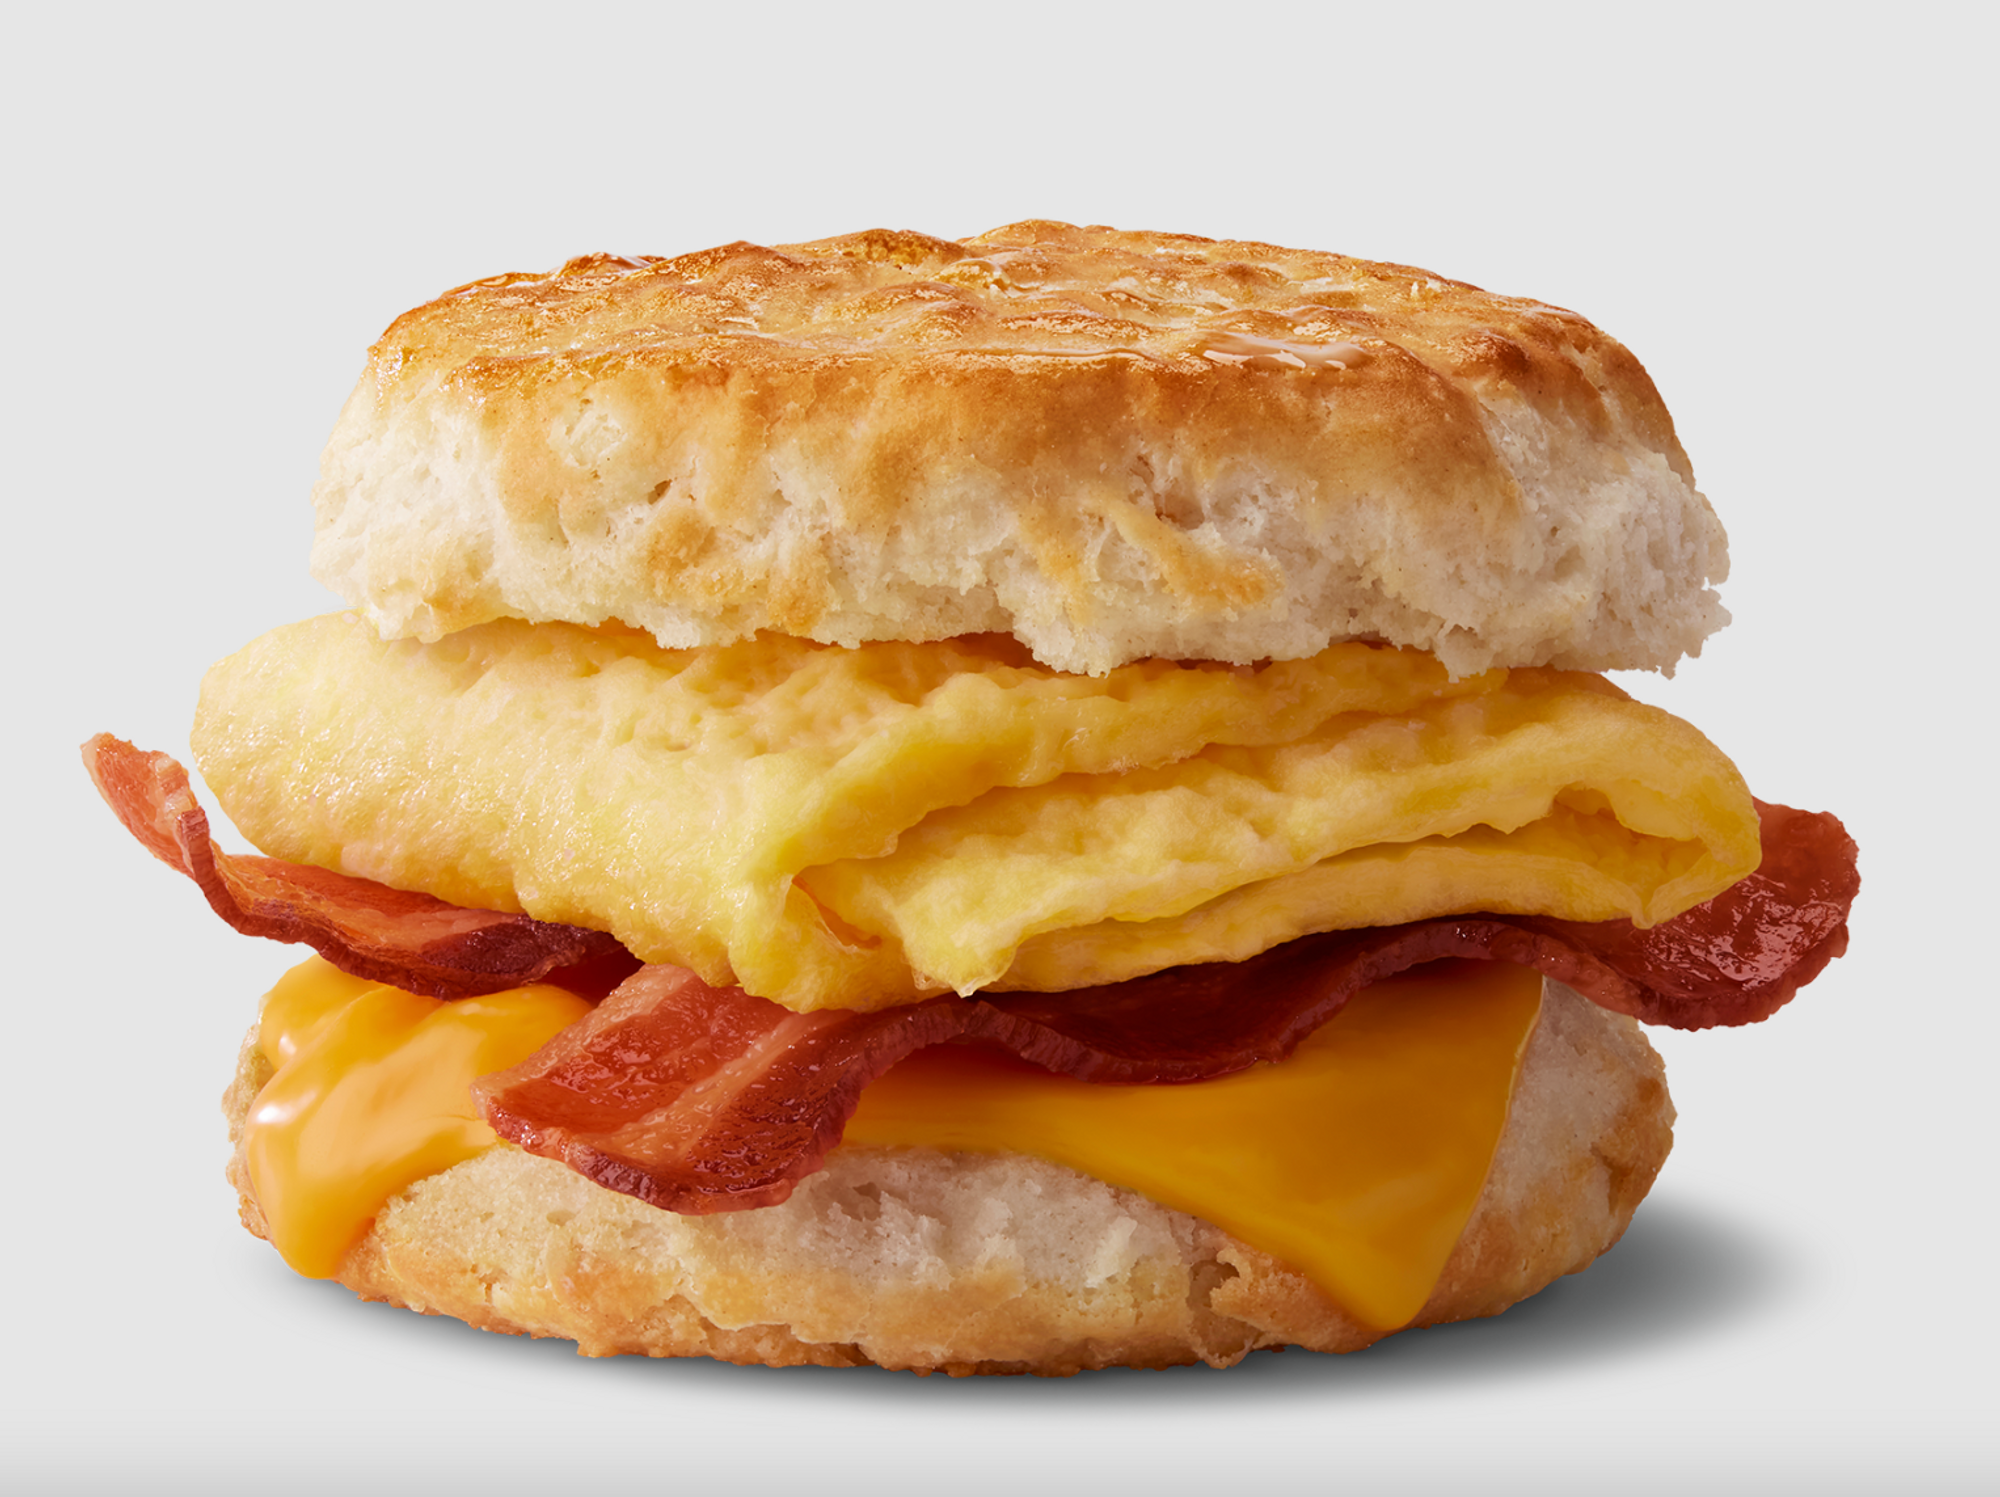 What happened to McDonald's all-day breakfast?